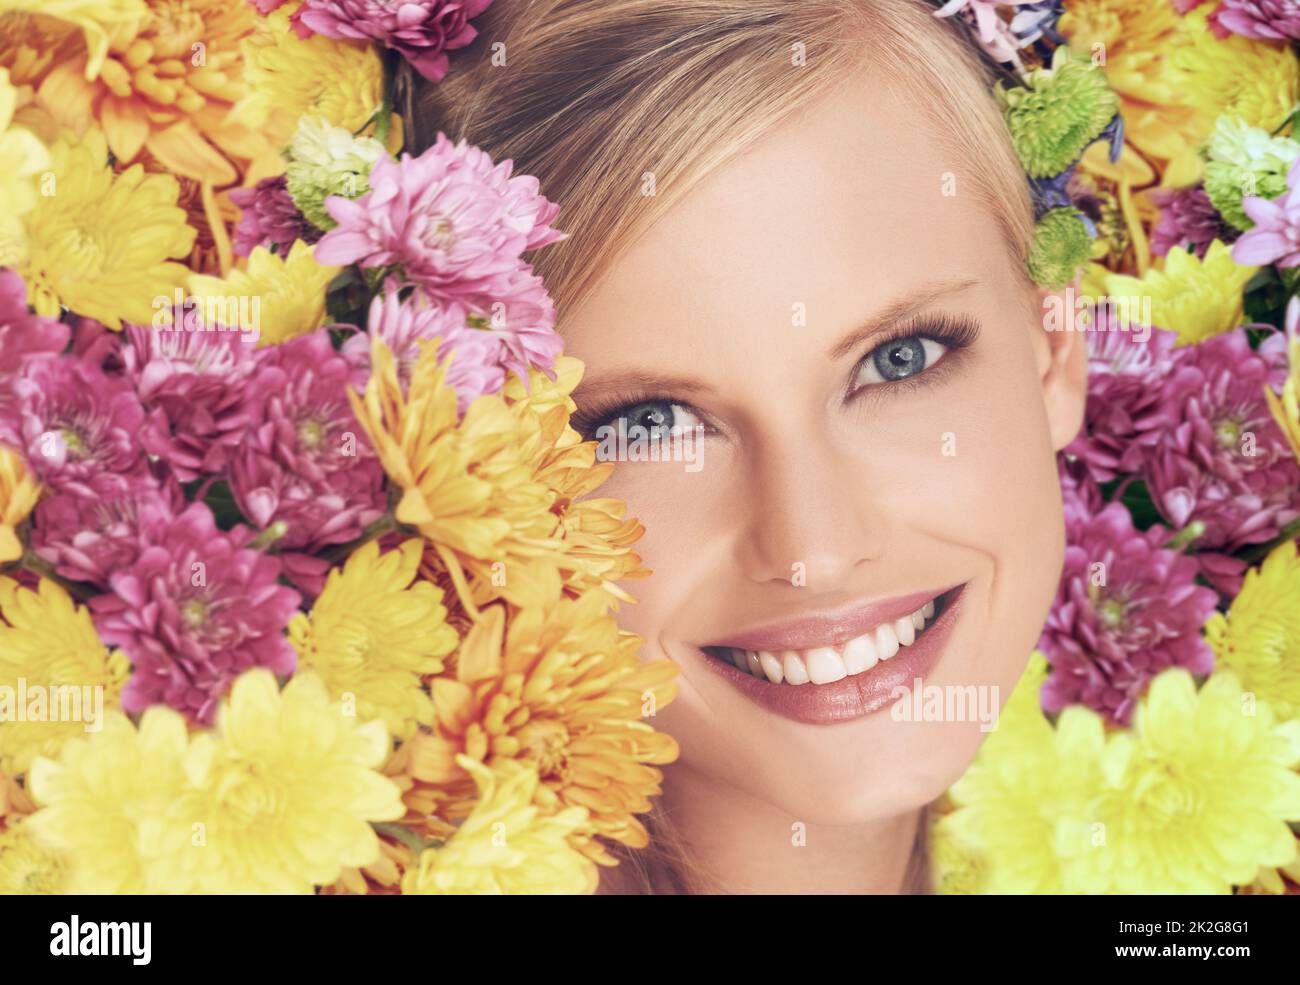 Her beauty is unmatched. A young woman with a flower arrangement in her hair smiling at the camera. Stock Photo